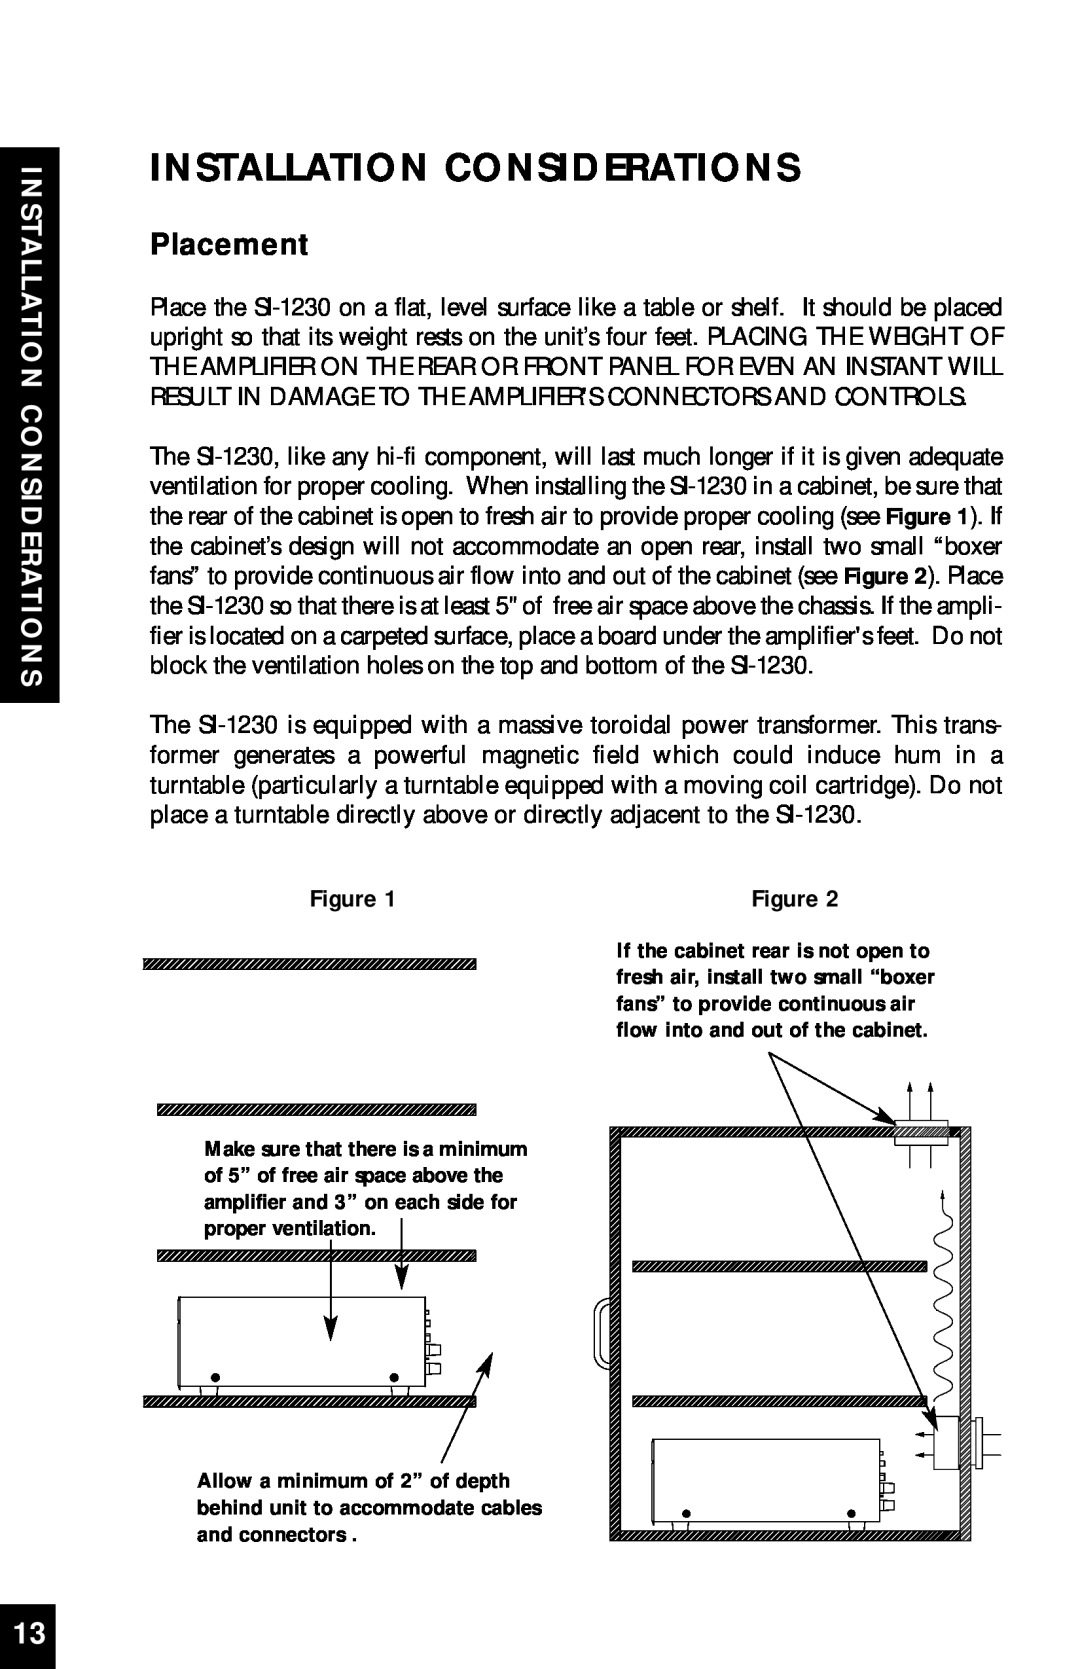 Niles Audio SI-1230 manual Installation Considerations, Placement 